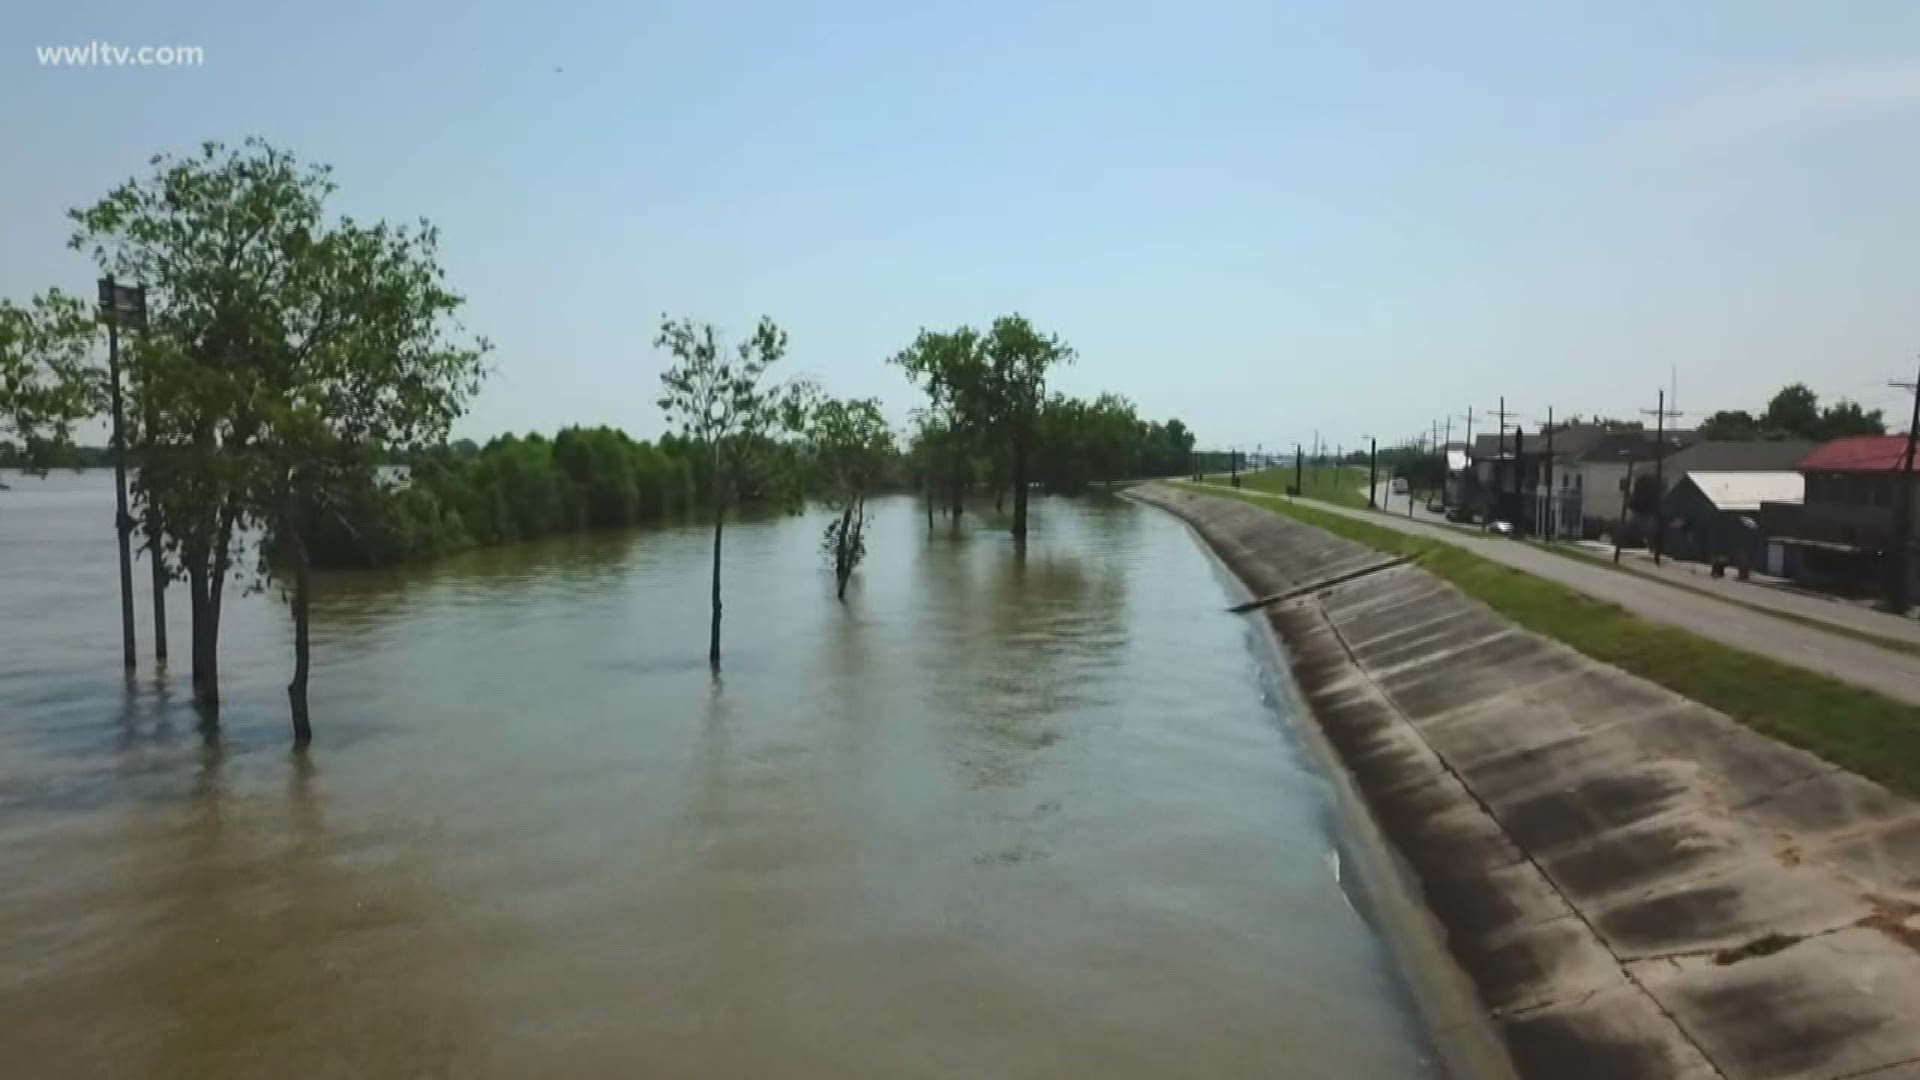 The U.S. Army Corps of Engineers has been in the longest flood fight in recorded history in New Orleans this year, which has prevented everything from road repair to people being able to work on their homes. As the Mississippi River continues to fall, however, it looks like countless construction projects will finally be able to get underway this week.